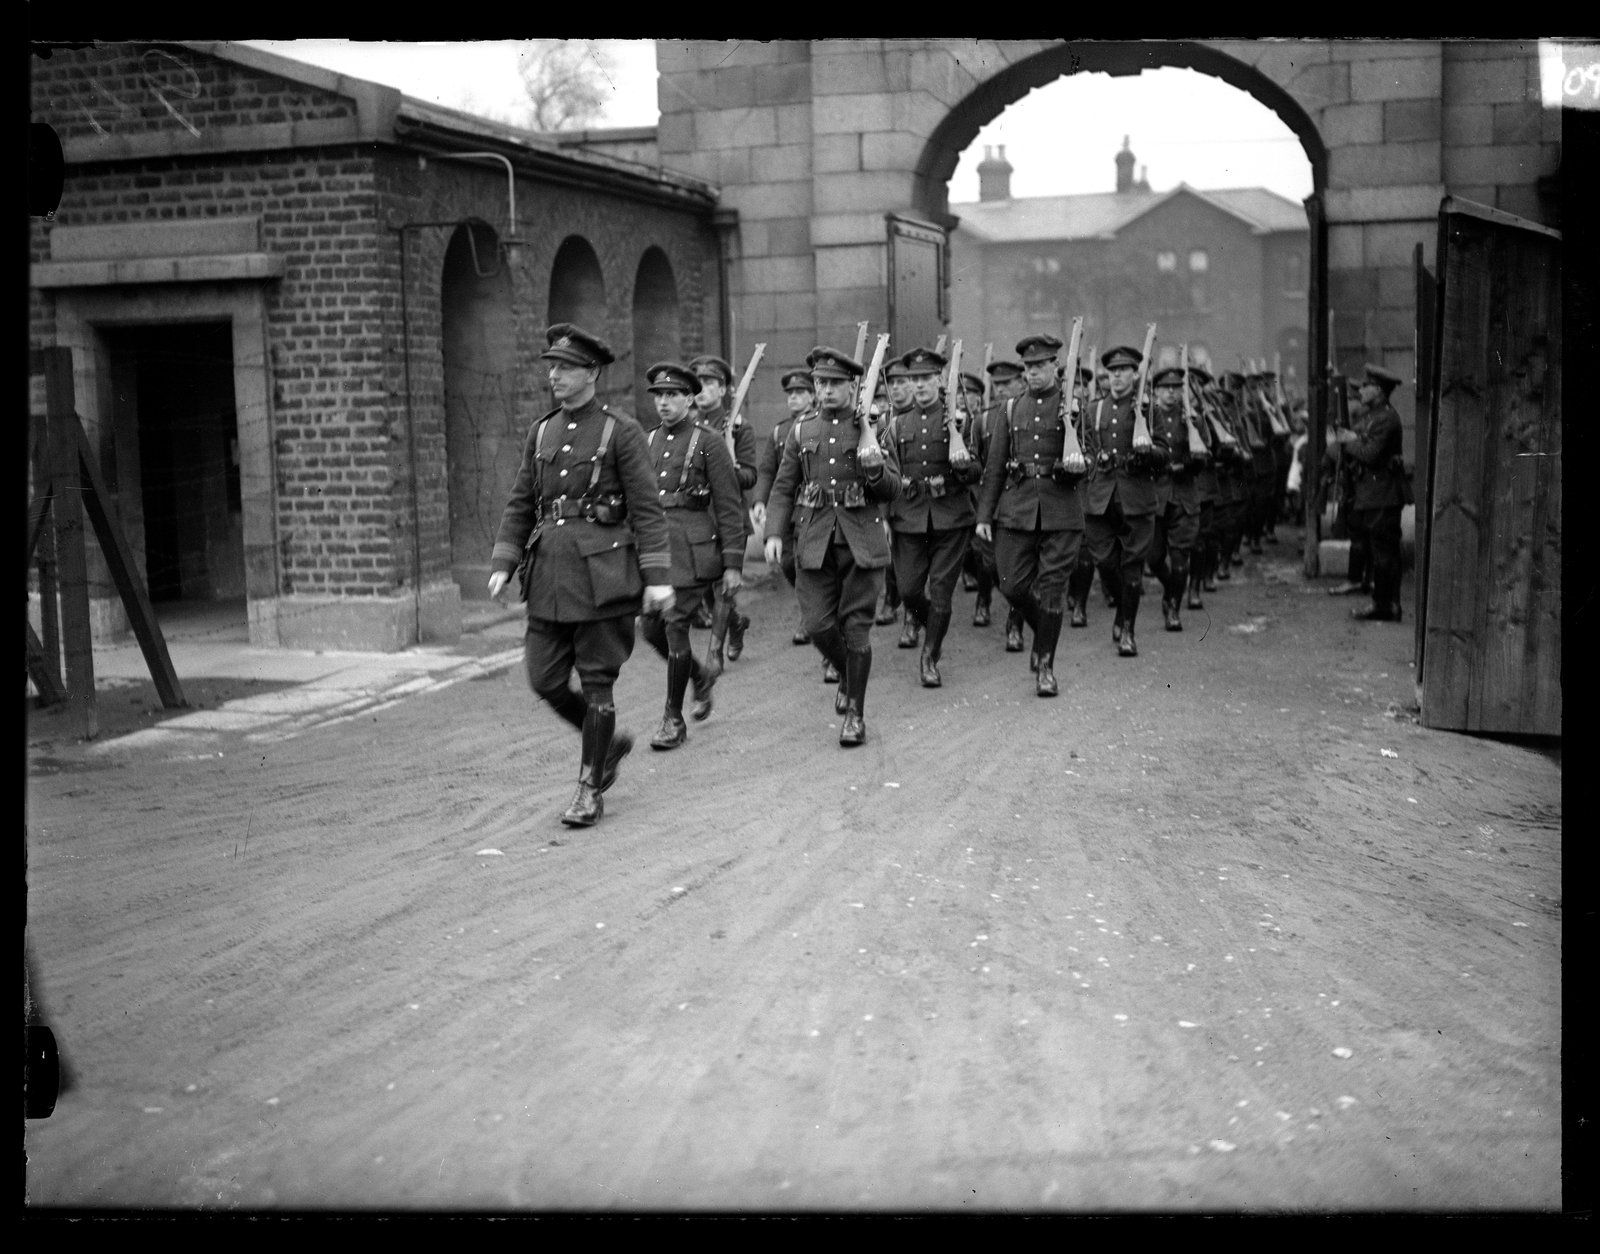 Image - The Free State Army takes over Beggar's Bush Barracks (Credit: RTE Photographic Archive, the Cashman Collection)